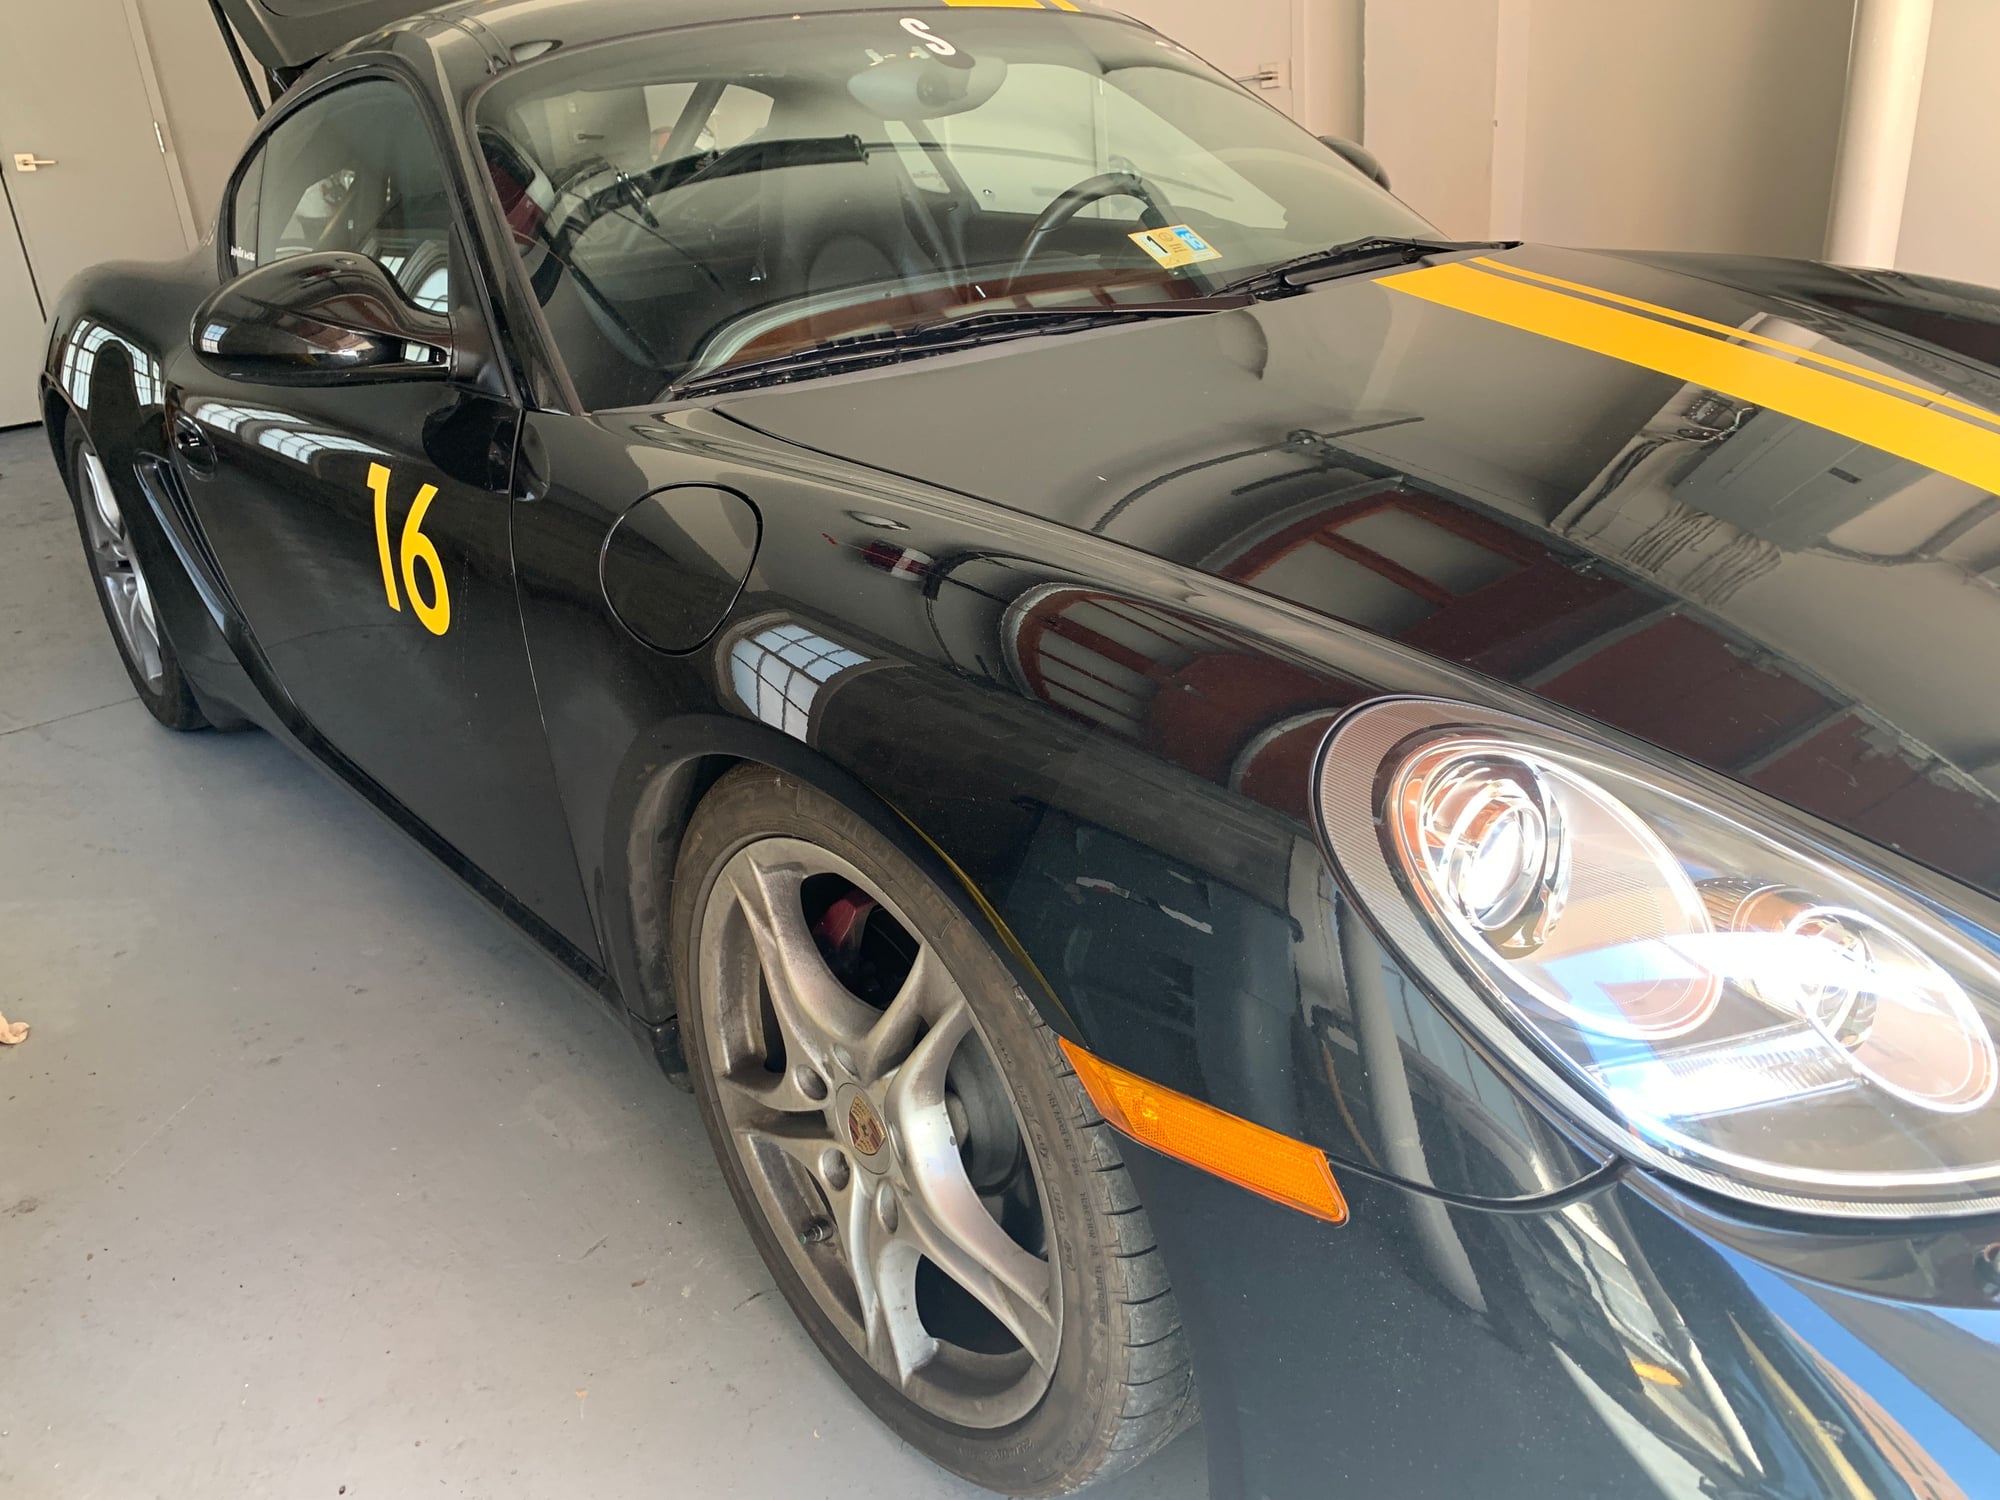 2010 Porsche Cayman -  - Used - VIN WP0AB2A86AU780241 - 26,267 Miles - 6 cyl - 2WD - Manual - Coupe - Black - Baltimore, MD 21231, United States